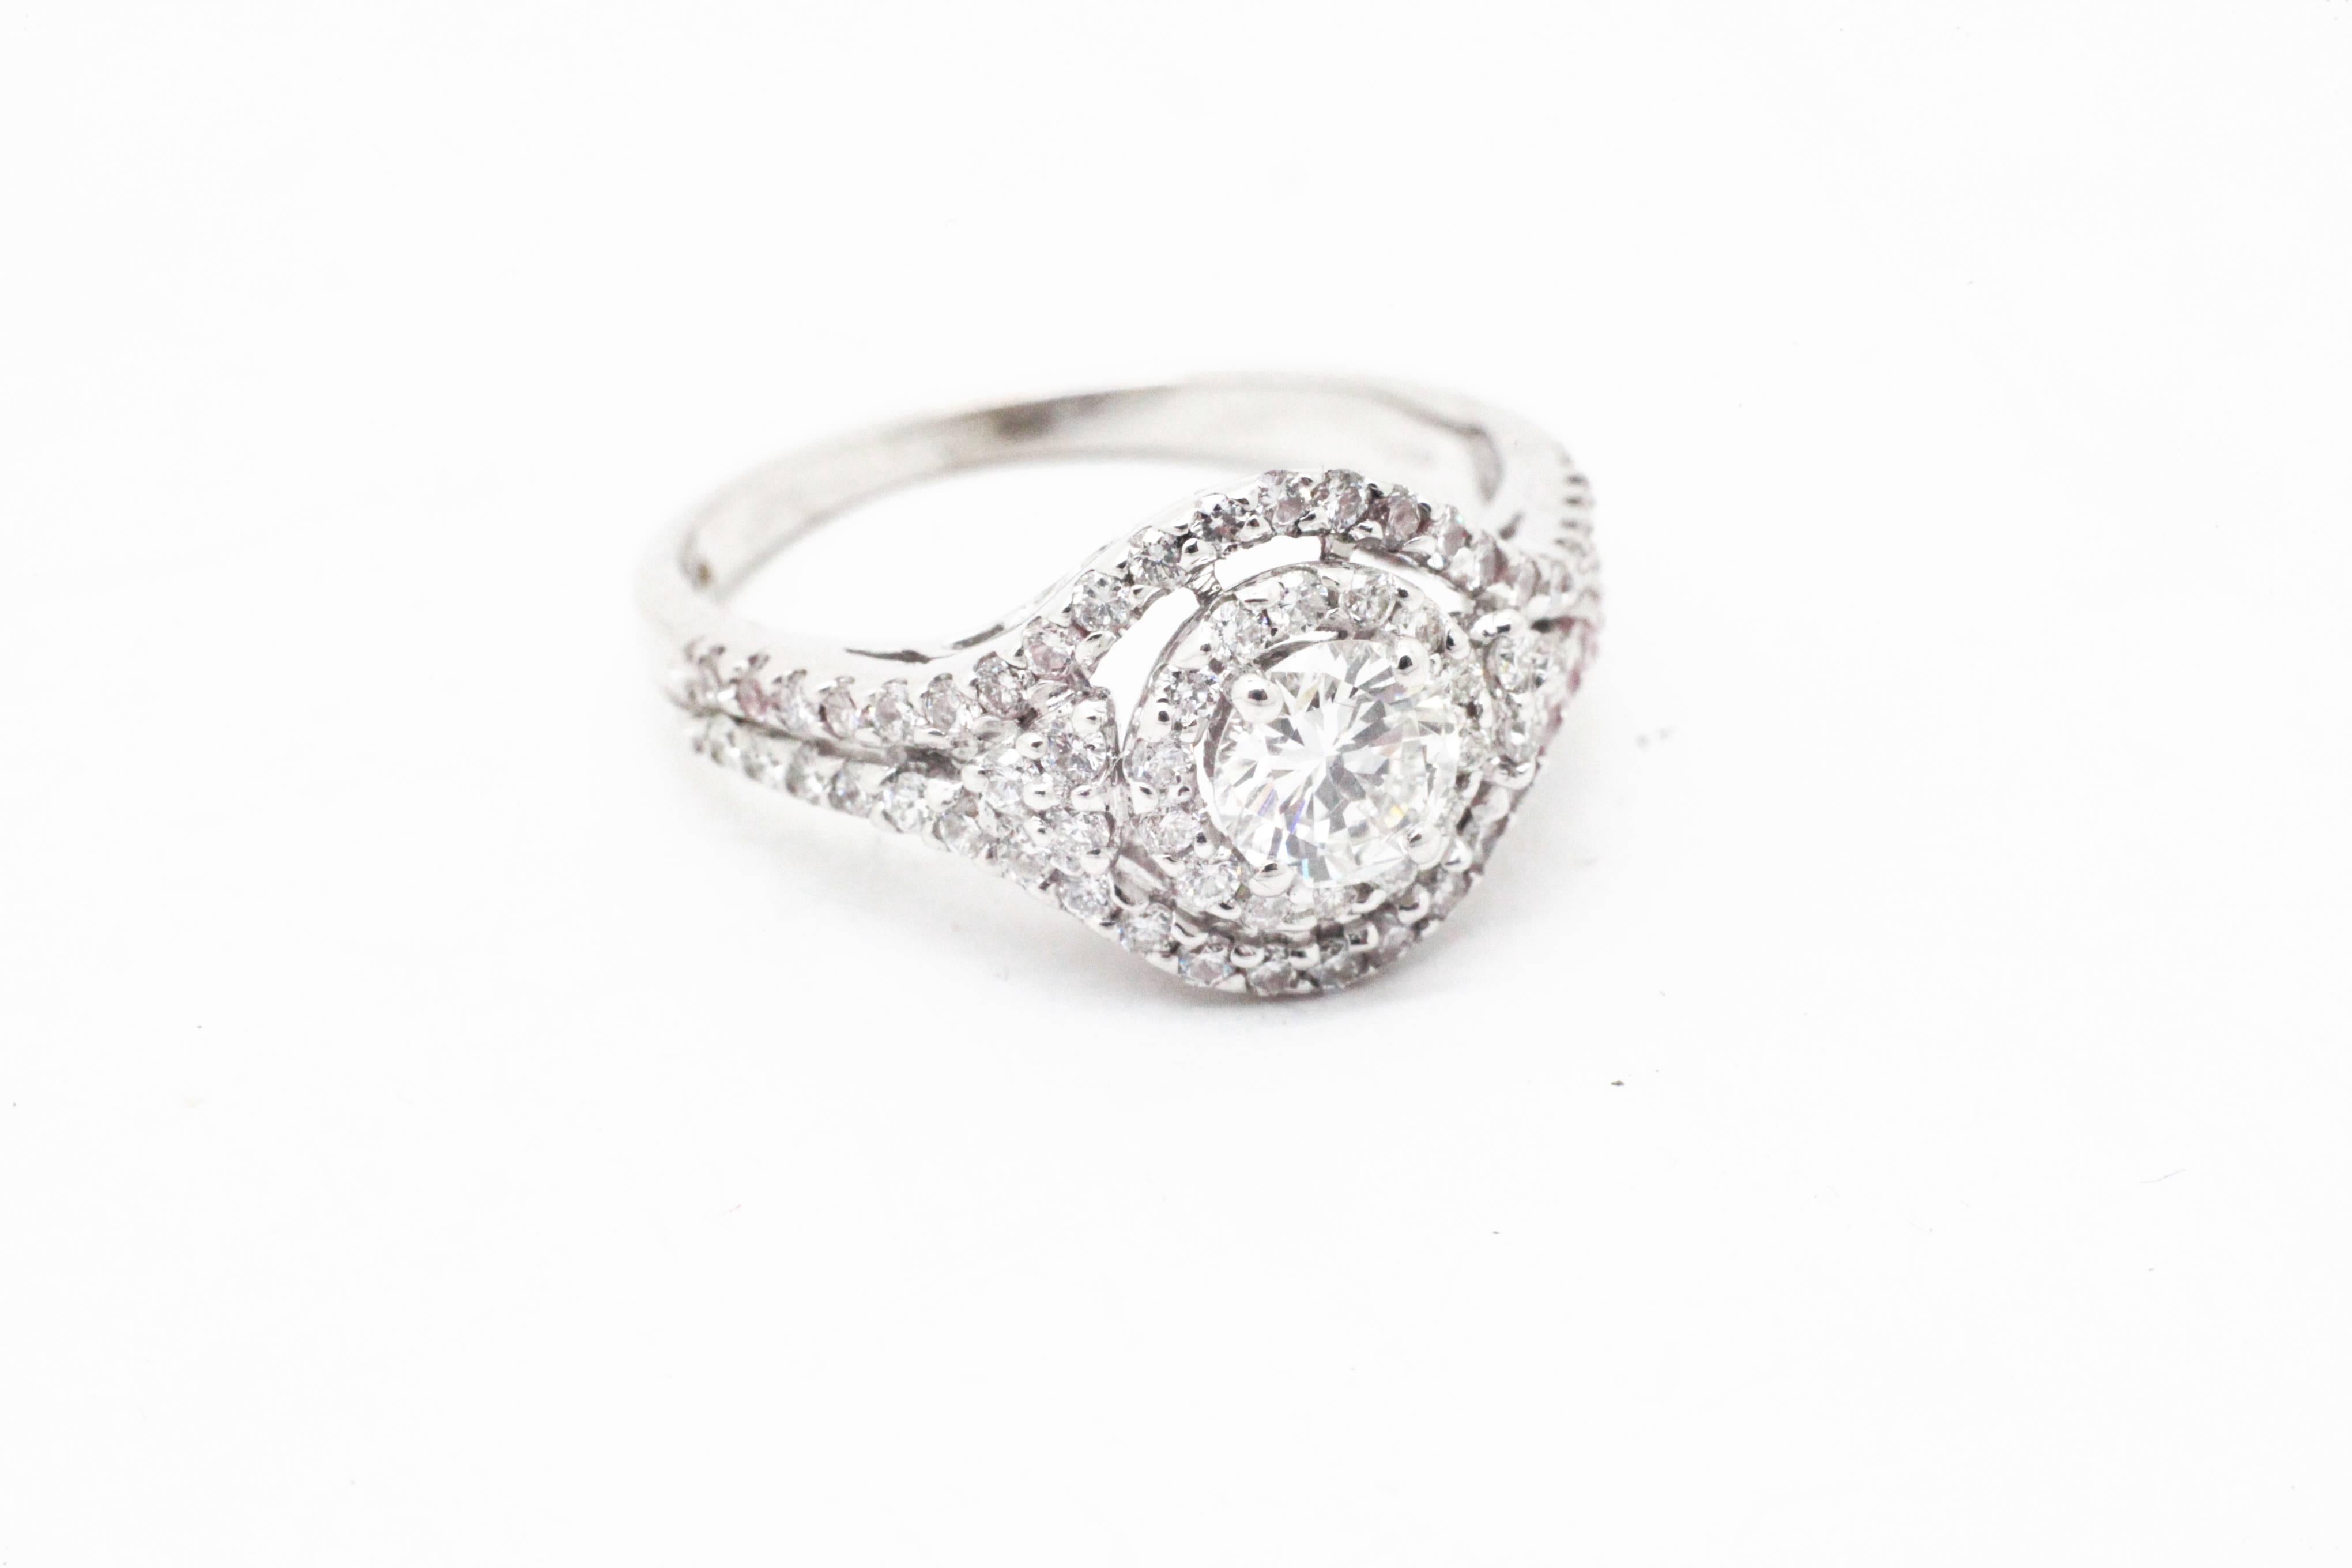 This FERRUCCI Diamond ring is conceived in 18k white gold, showcasing clear white diamonds for a total carat weight of 0.98 carats, hand crafted in Italy,

SIze 6 complimentary adjustable upon order
